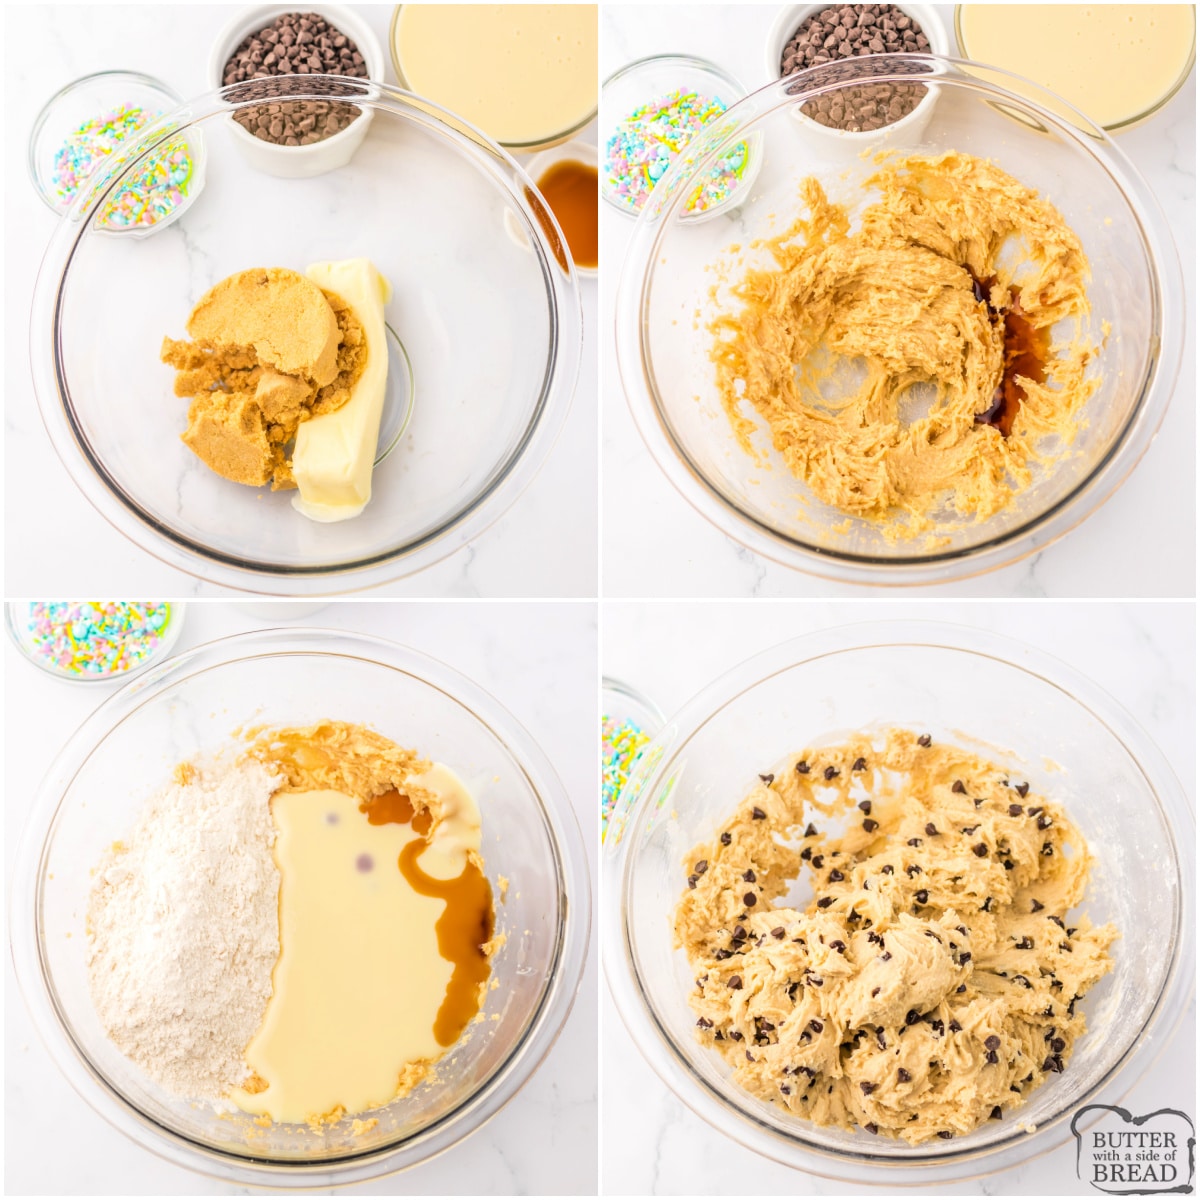 Step by step instructions on how to make cookie dough.